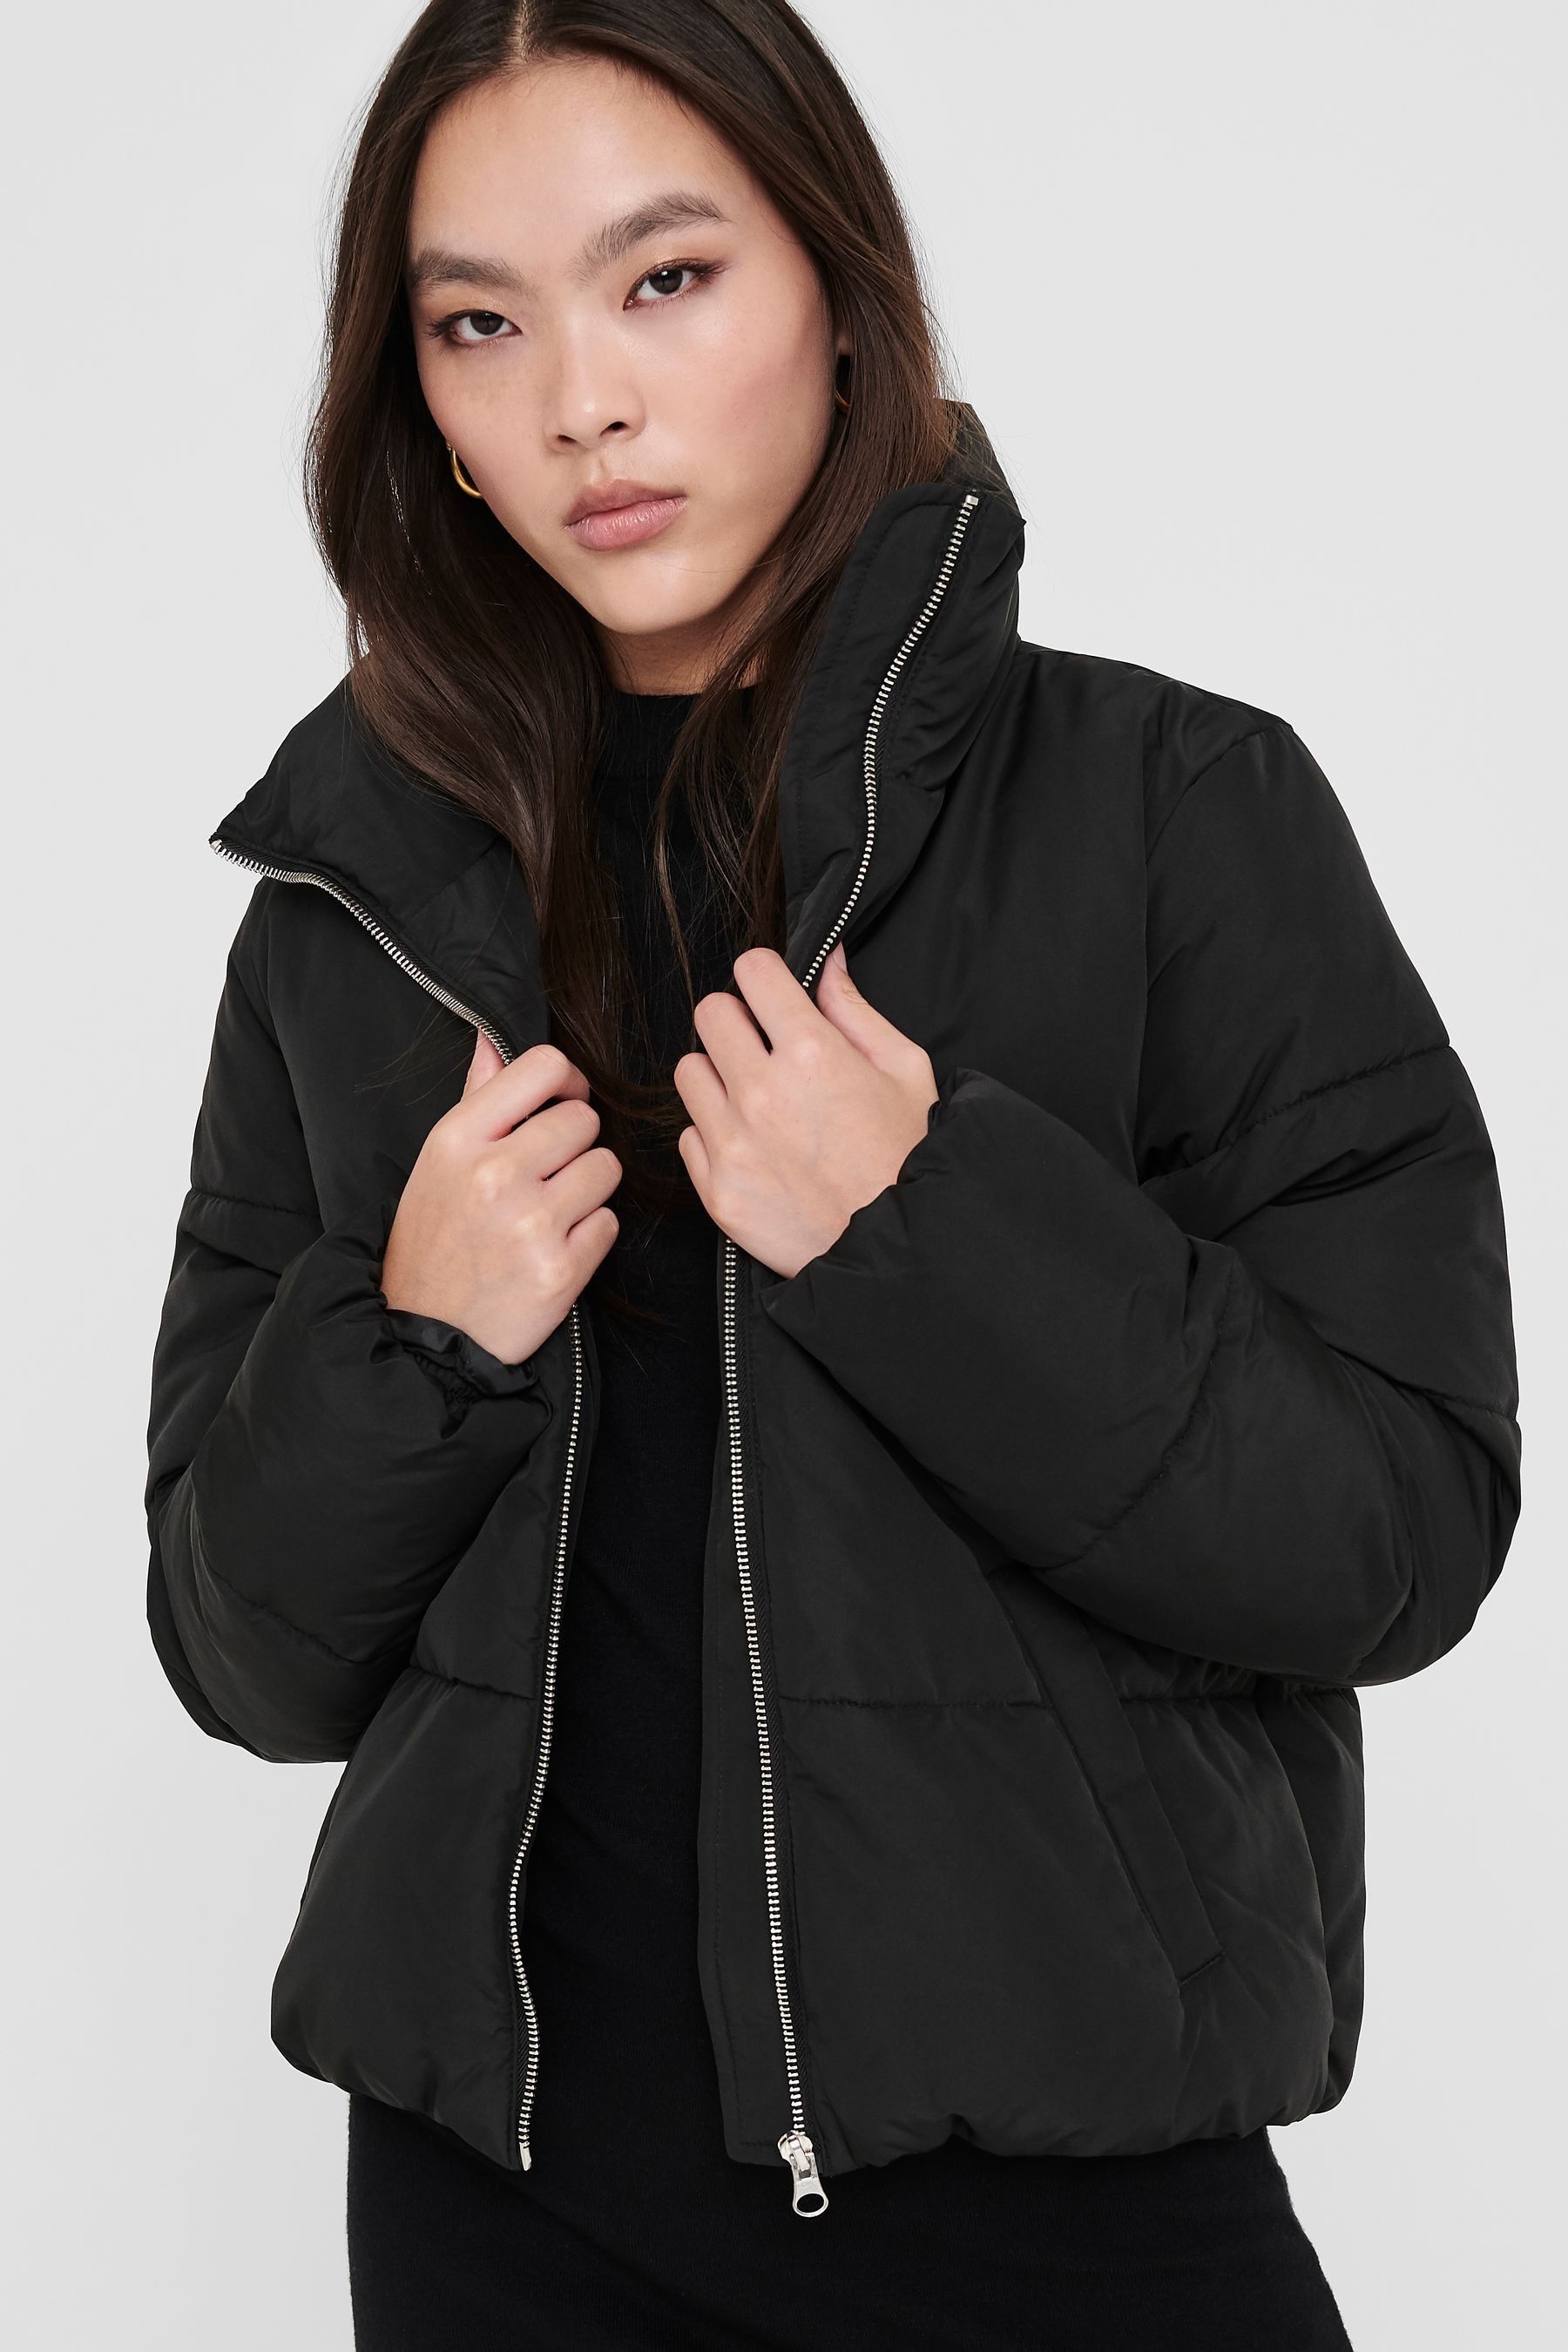 Buy JDY Black Padded Jacket from the Next UK online shop